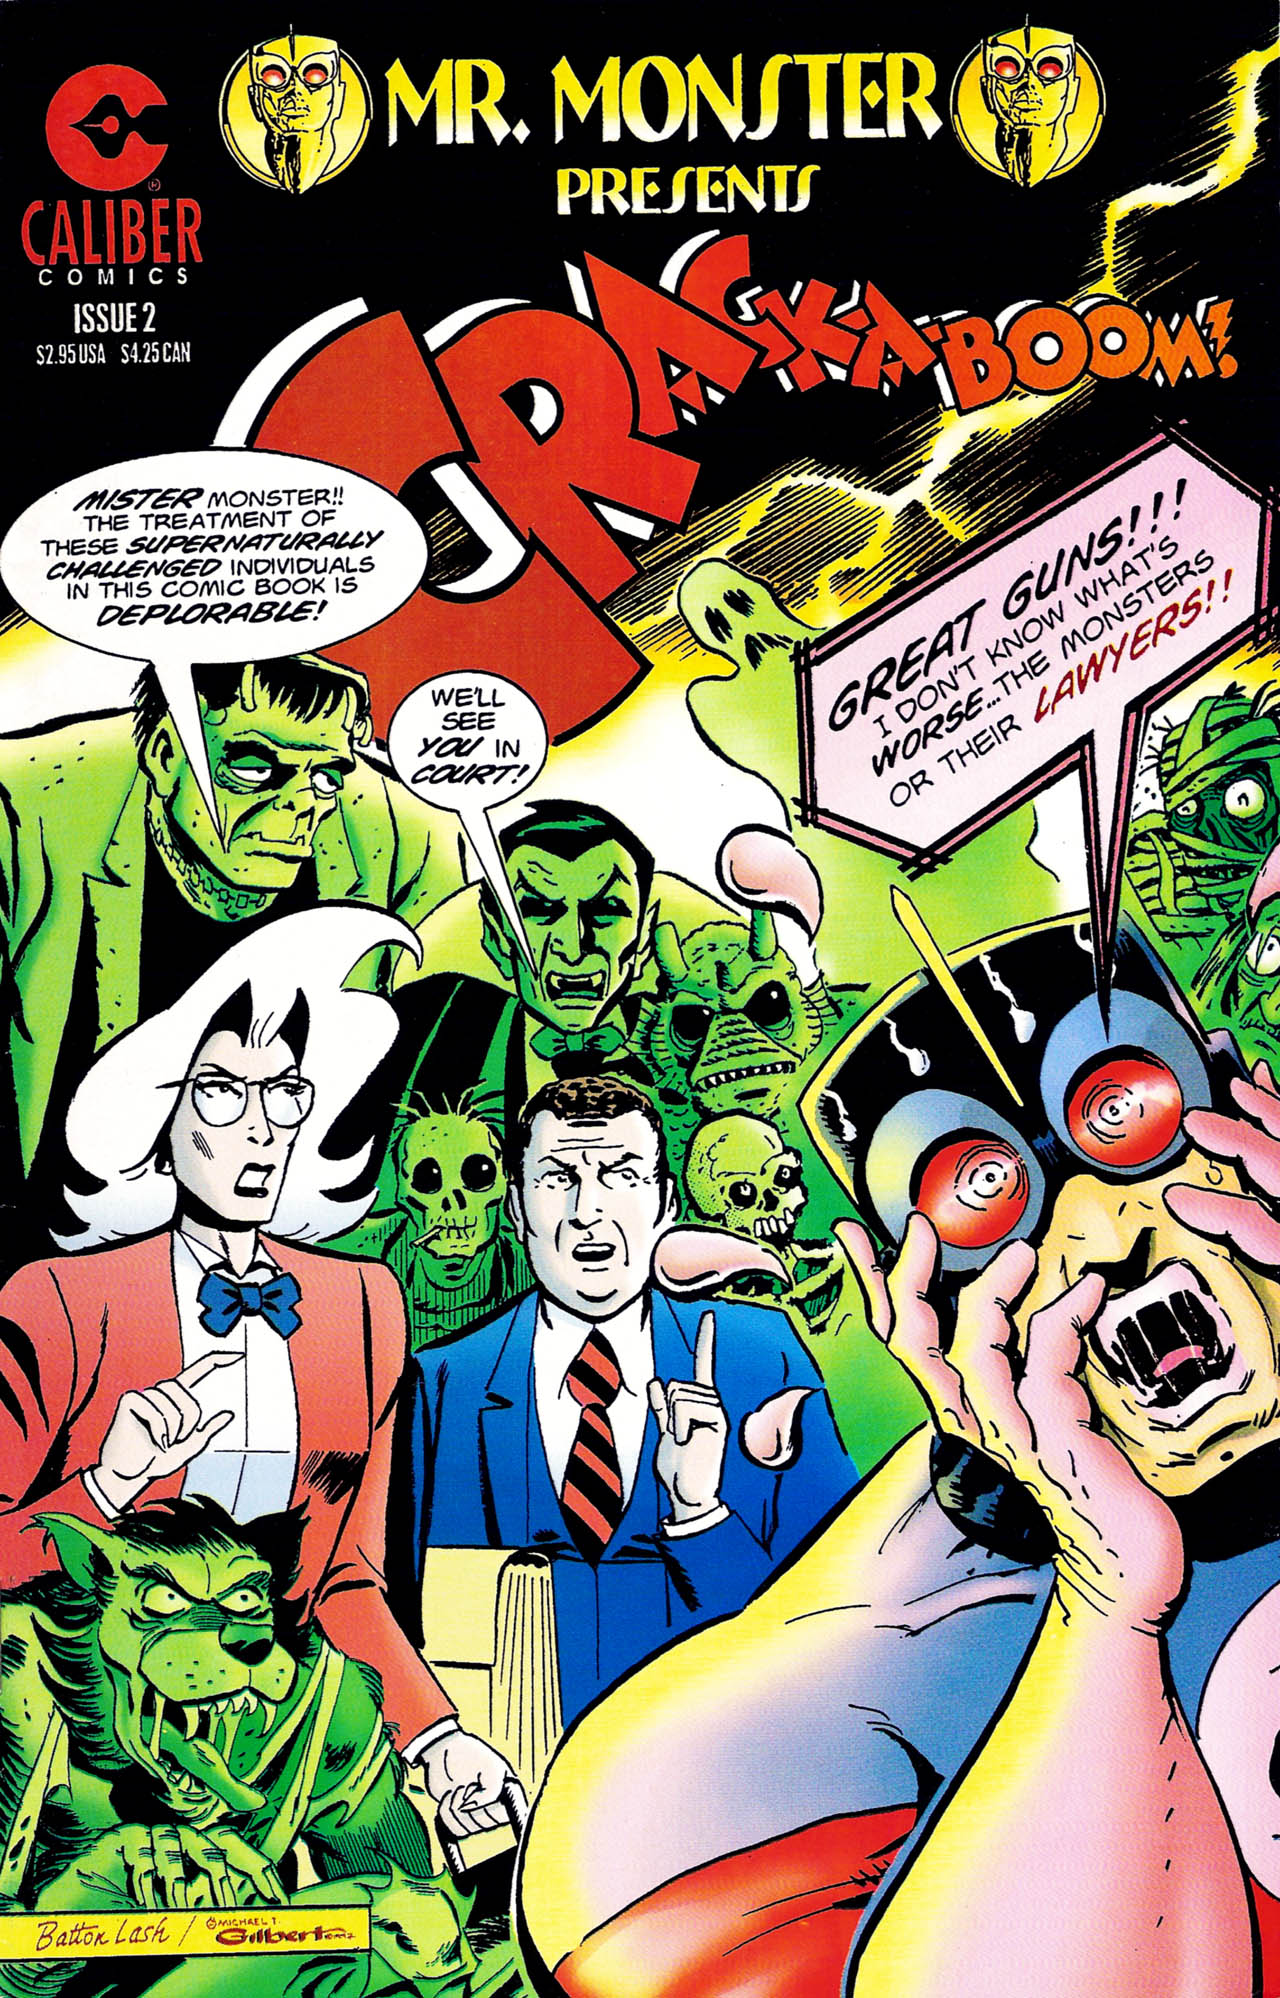 Read online Mr. Monster Presents: (crack-a-boom) comic -  Issue #2 - 1